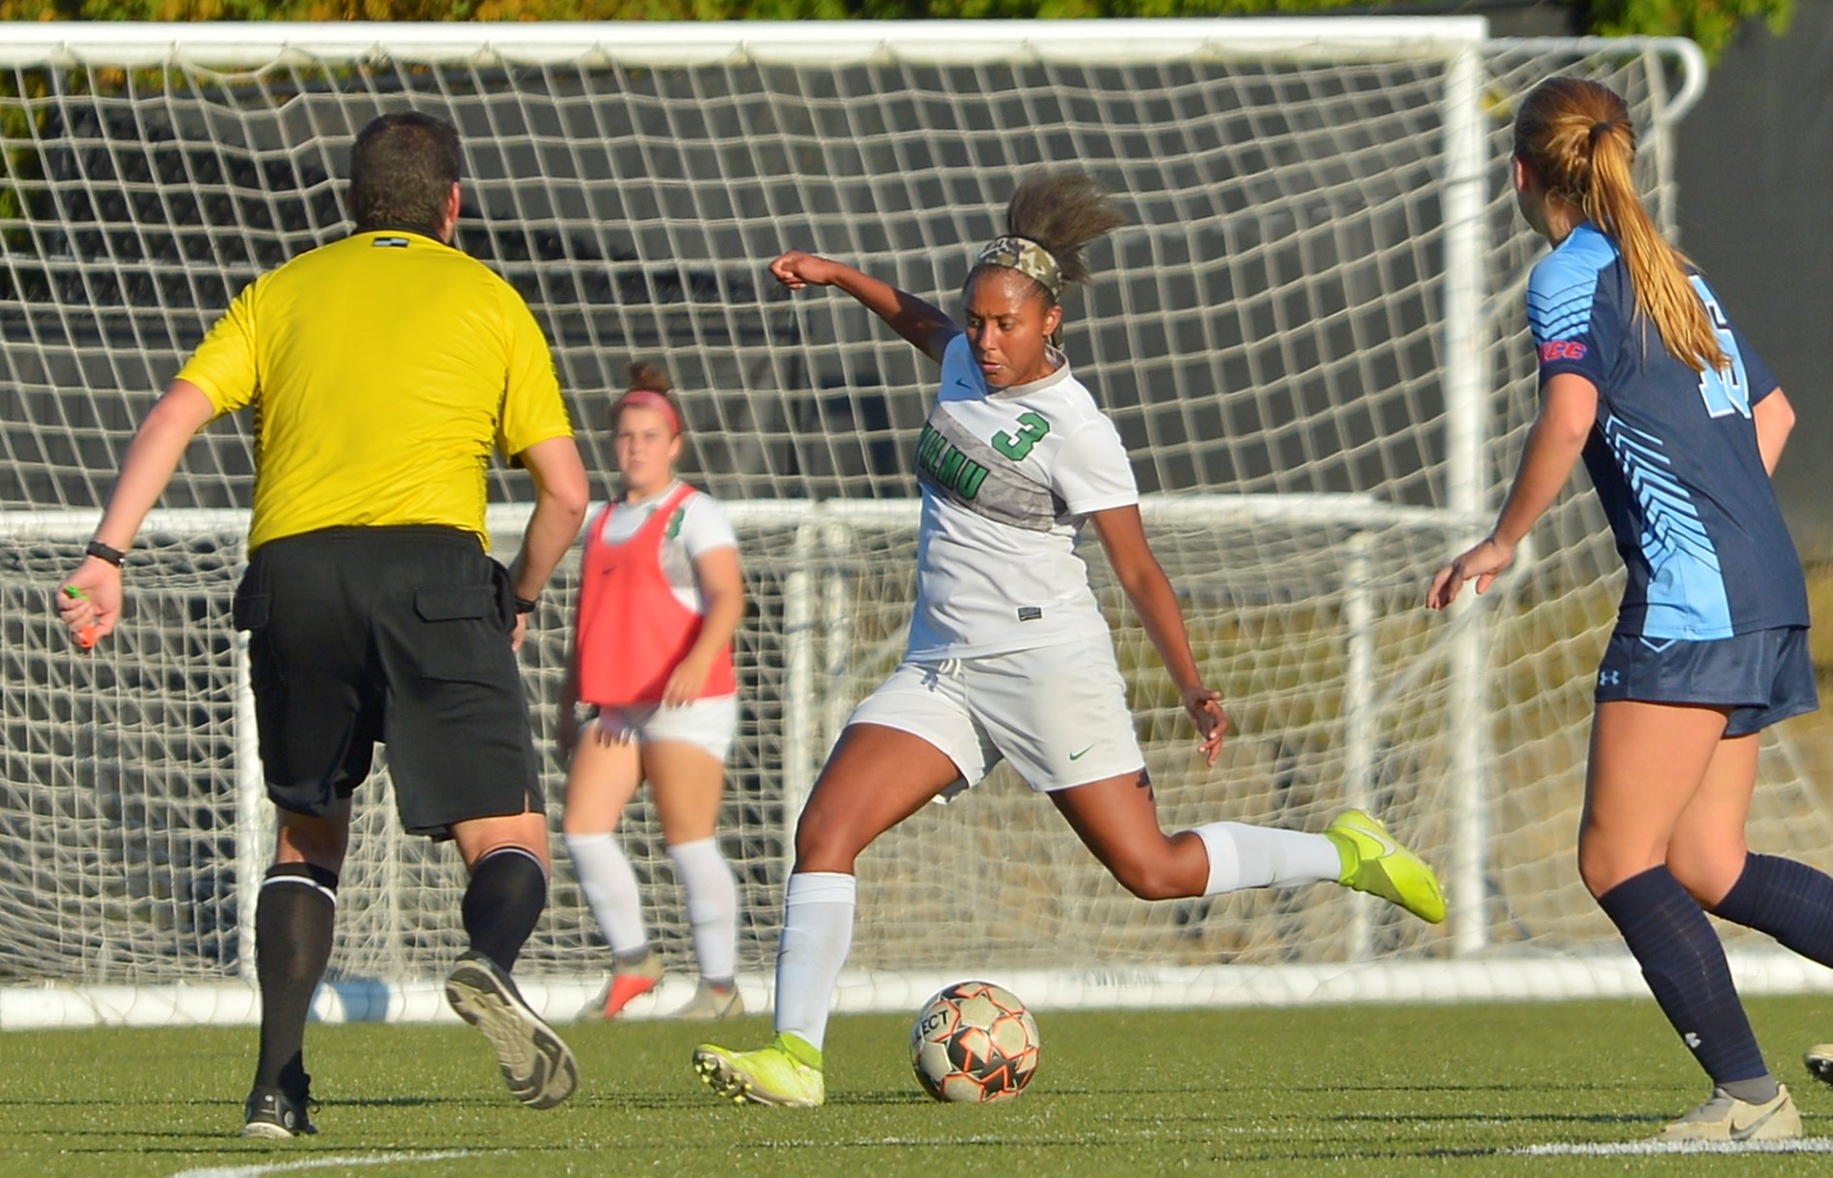 Photo of Alexis Johnson against Jefferson. Copyright 2019; Wilmington University. All rights reserved. Photo by James Jones. October 16, 2019 vs. Jefferson.